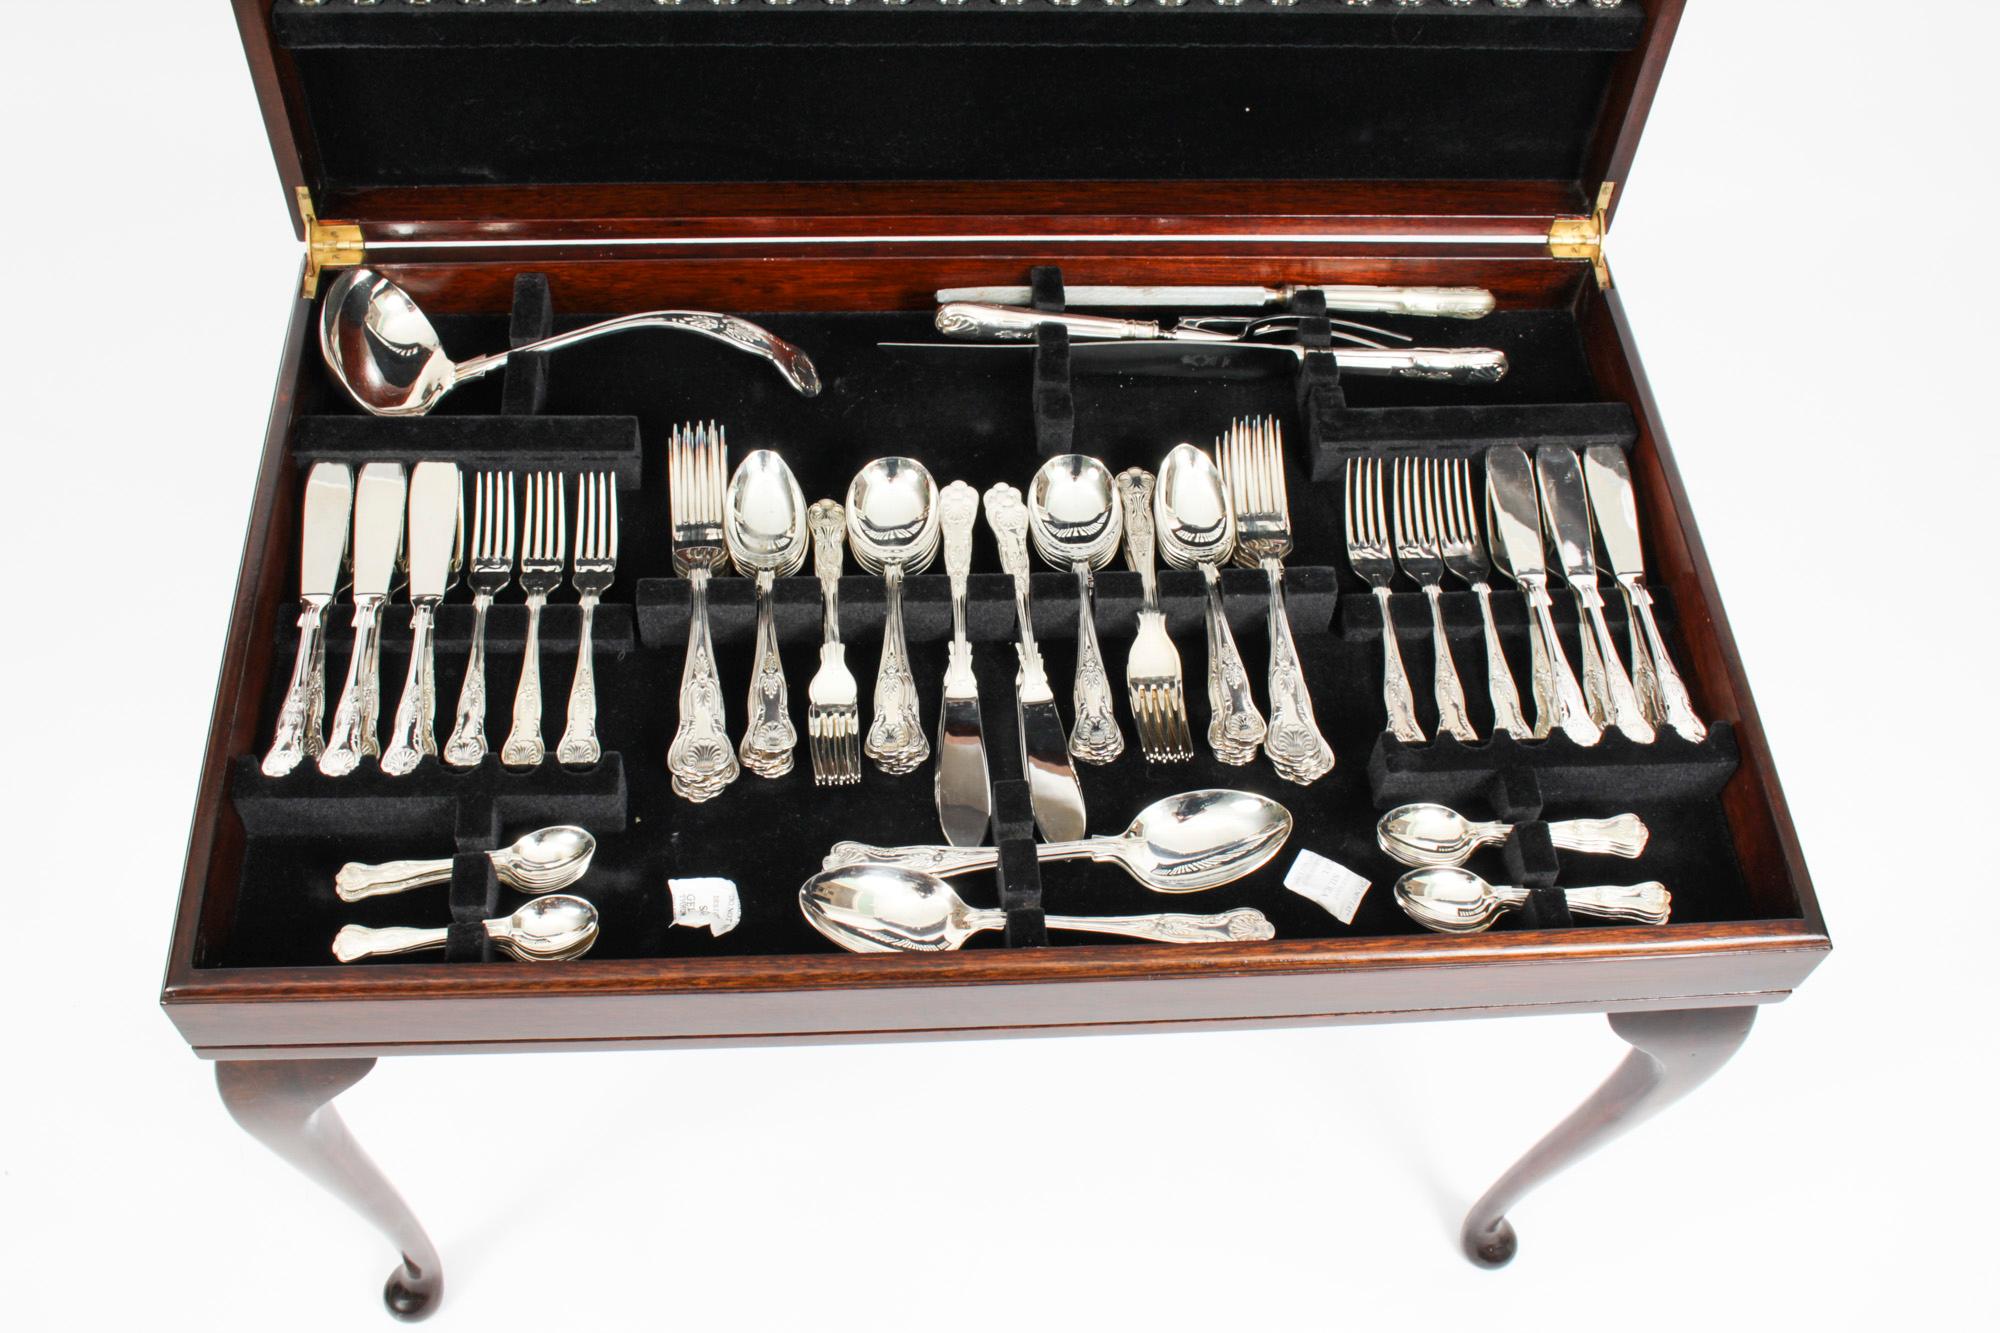 Mid-20th Century Vintage English Silver Plated Cased Kings Pattern Cutlery Set x 12 Mid 20th C